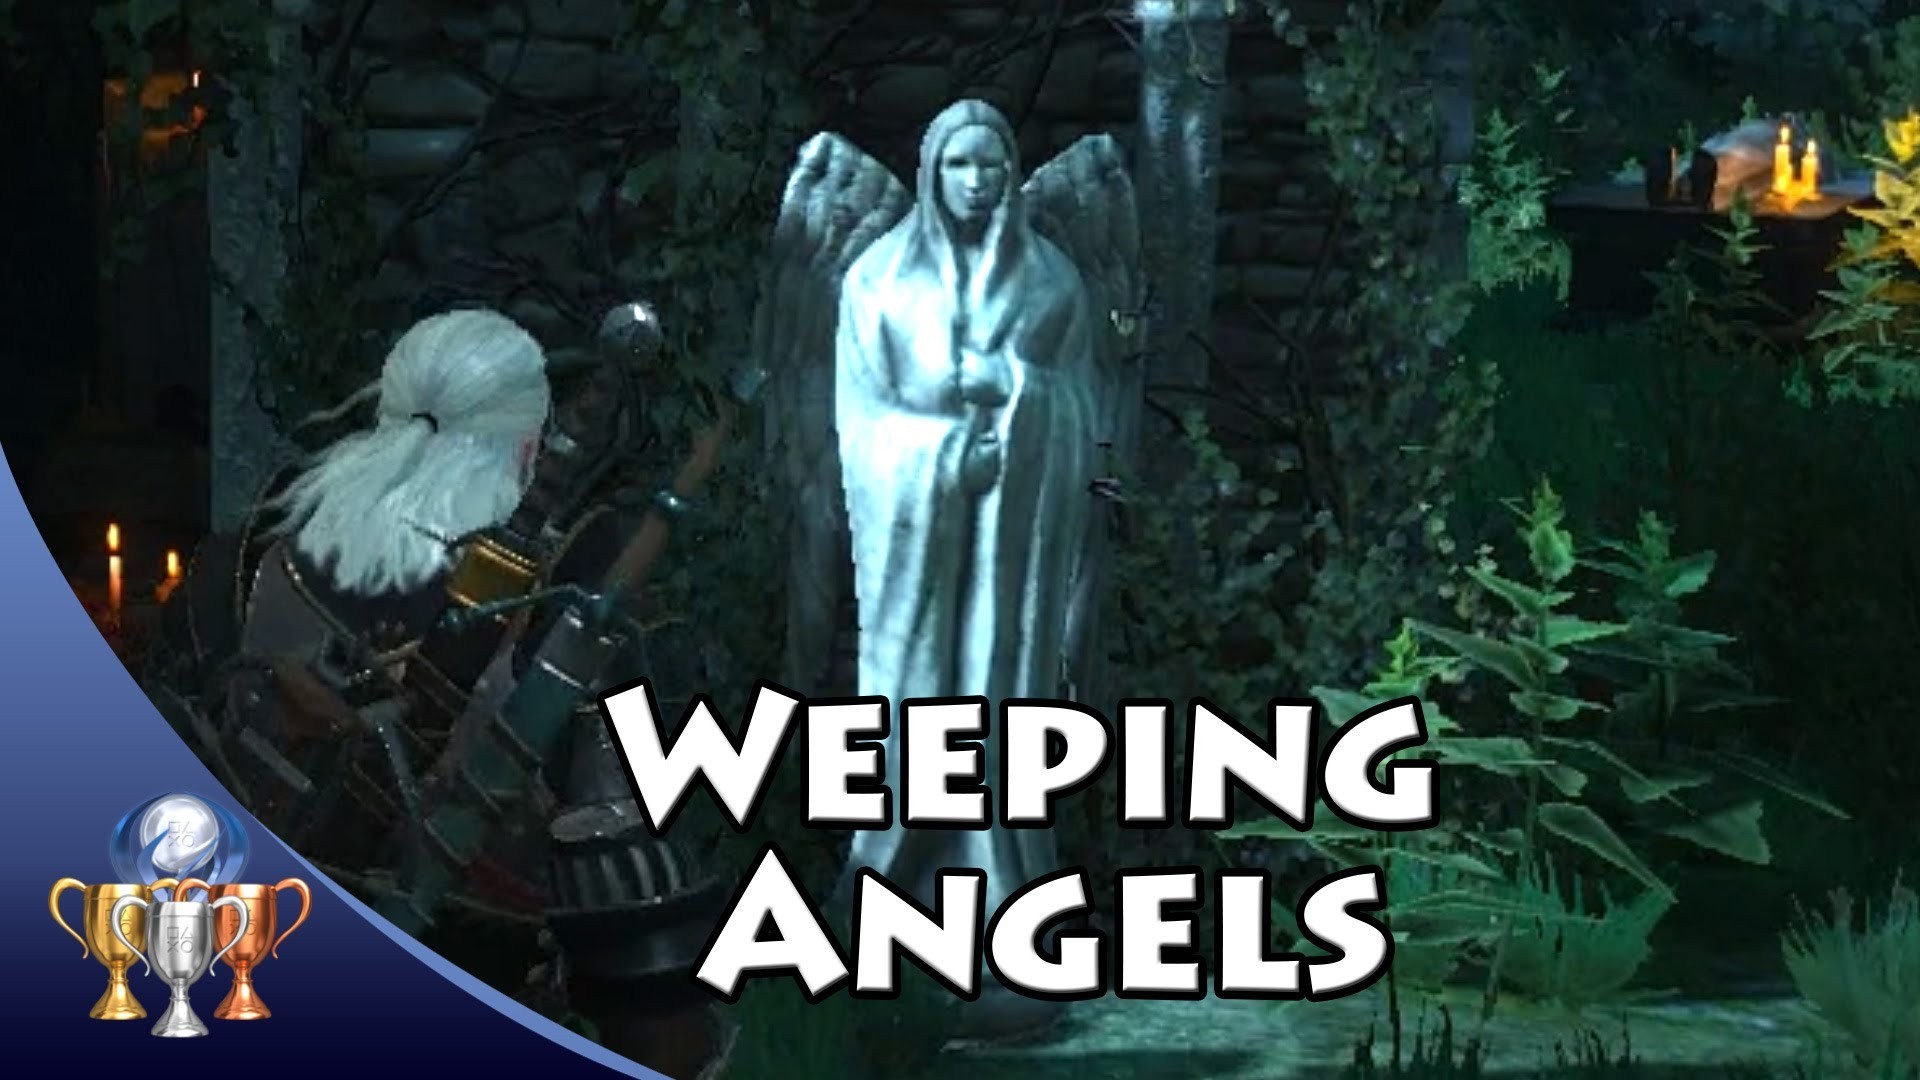 1920x1080 Weeping Angels Tv | www.galleryhip.com - The Hippest Pics